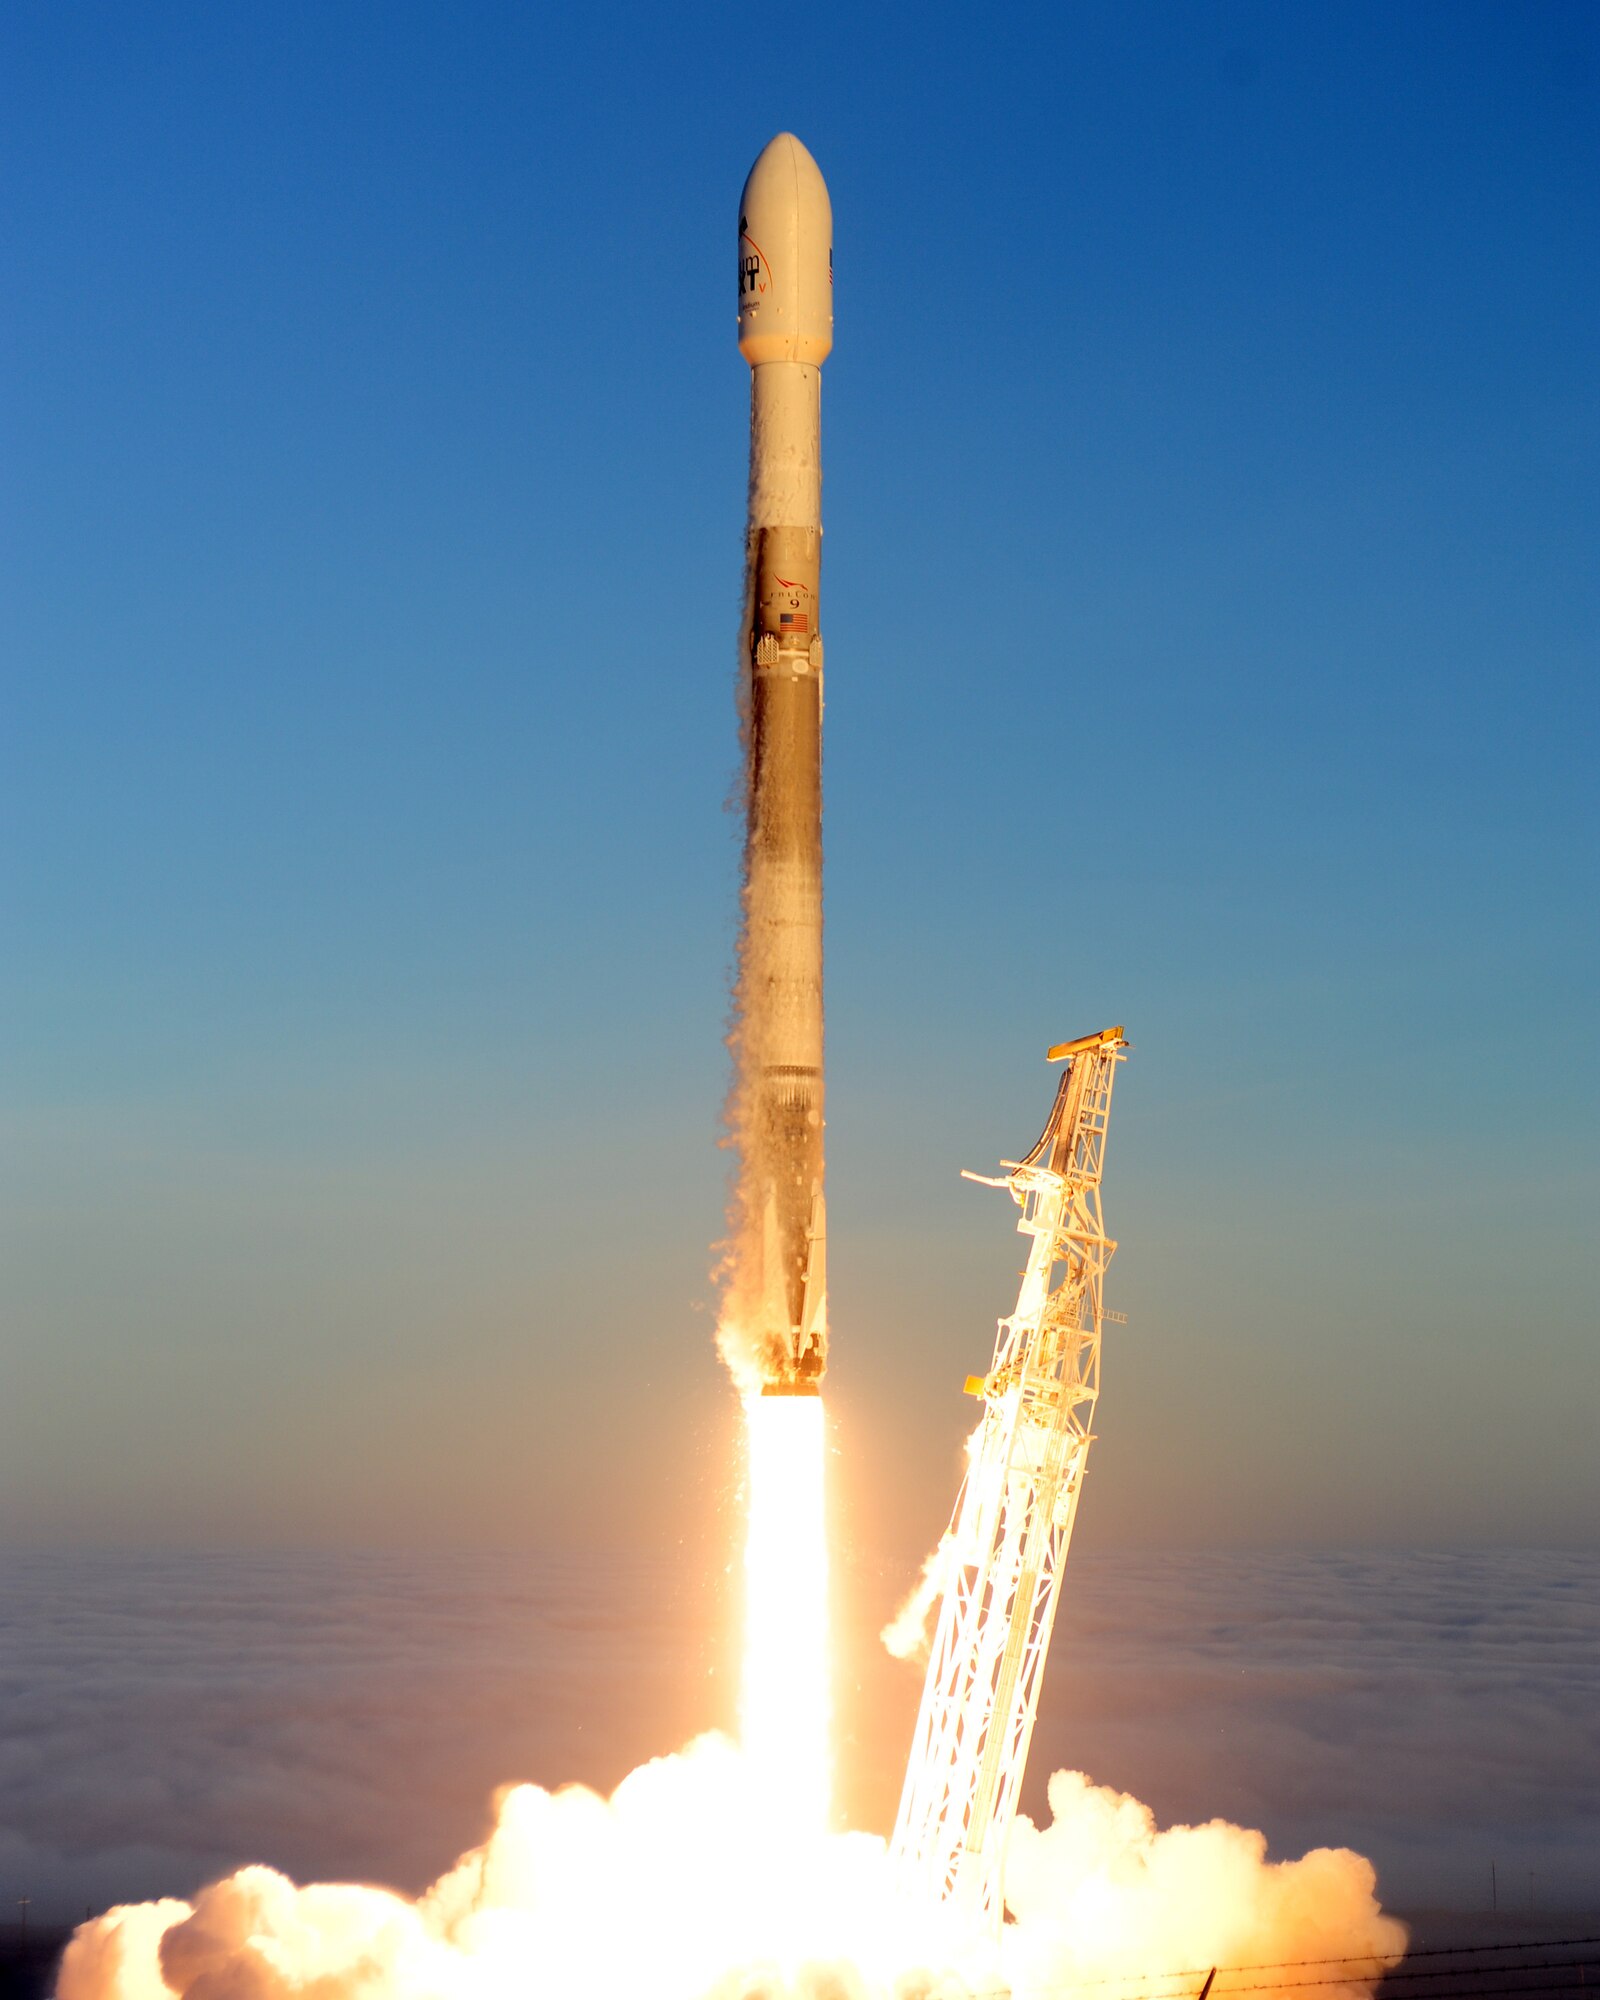 launch of the fifth Iridium mission on a SpaceX Falcon 9 rocket